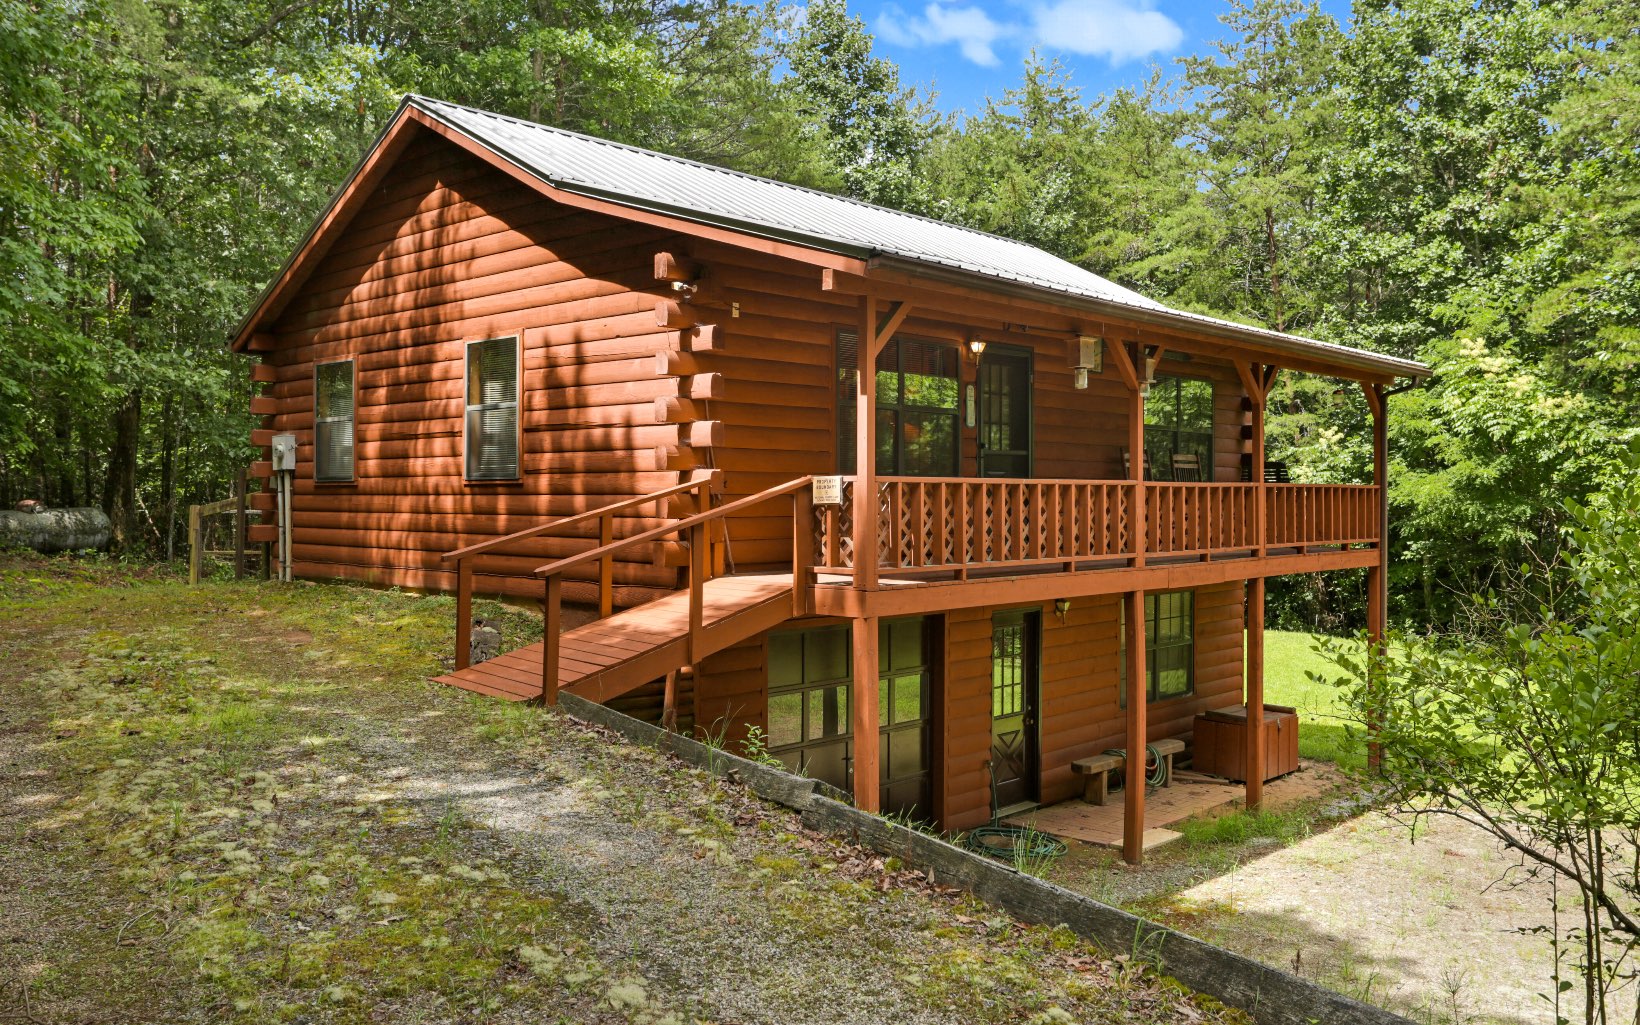 ENJOY THE MOUNTAINS OF NORTH GEORGIA!! Great Cabin in the North Georgia Mountains! Located in a well-established subdivision, this 2 Bedrooms/2 Bathrooms cabin offers Kitchen, Dining & Den area with a stone gas fireplace, a large covered Porch to enjoy the Mountain Views & Air, and one car garage.